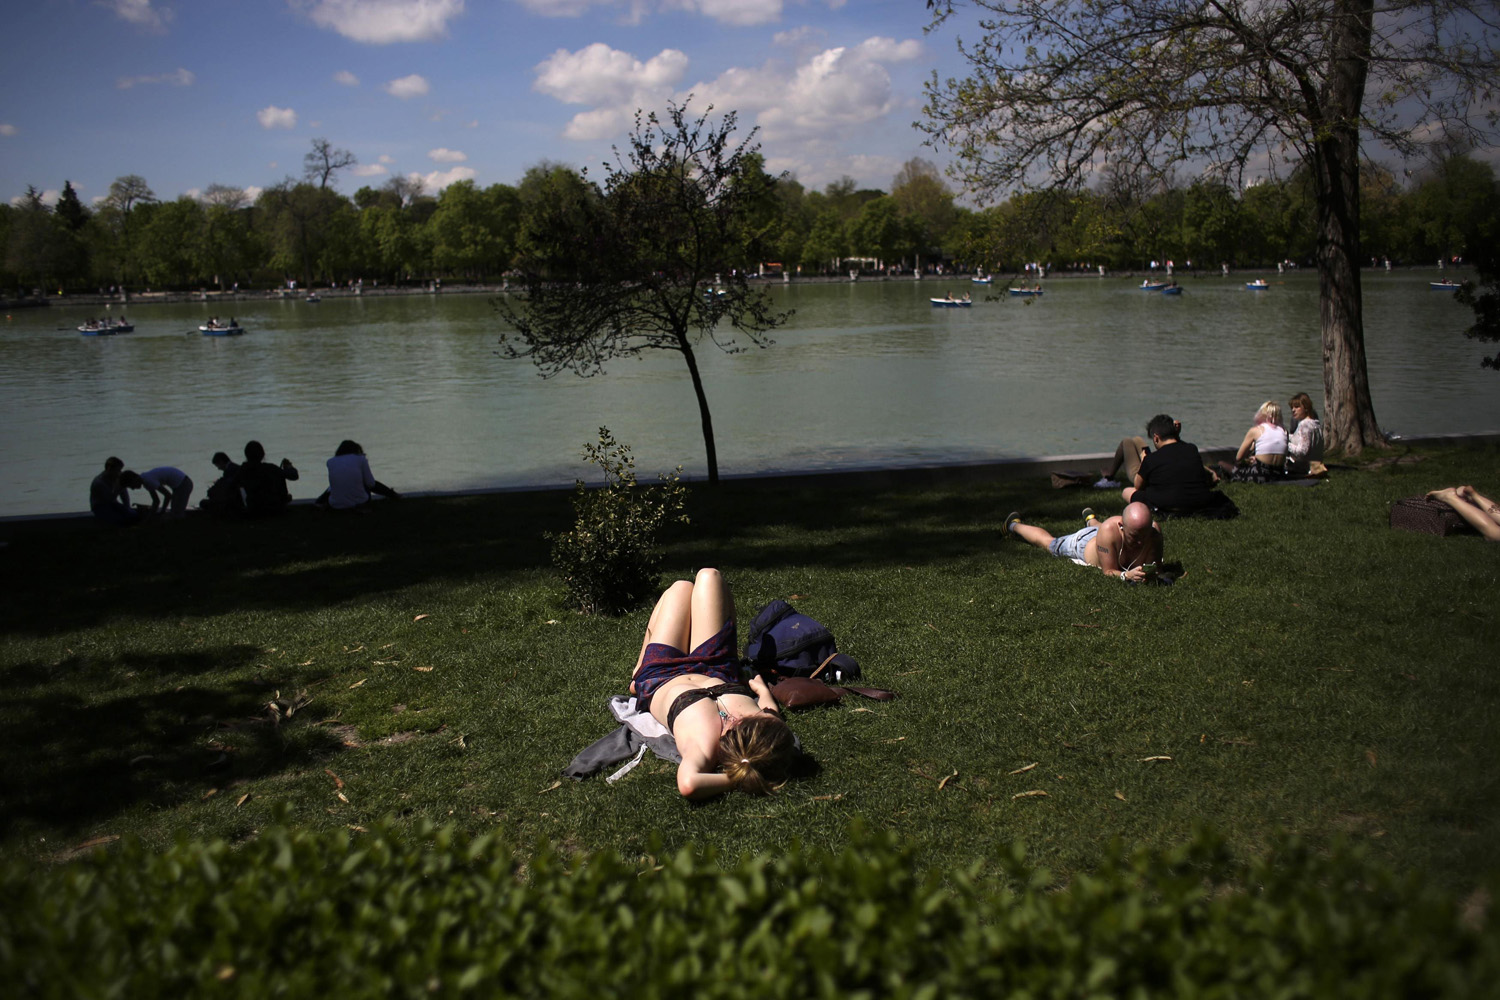 April 7, 2014. People sunbathe and watch boats on an artificial lake as they enjoy the warm weather during a sunny spring day at Madrid's Retiro park in Spain.